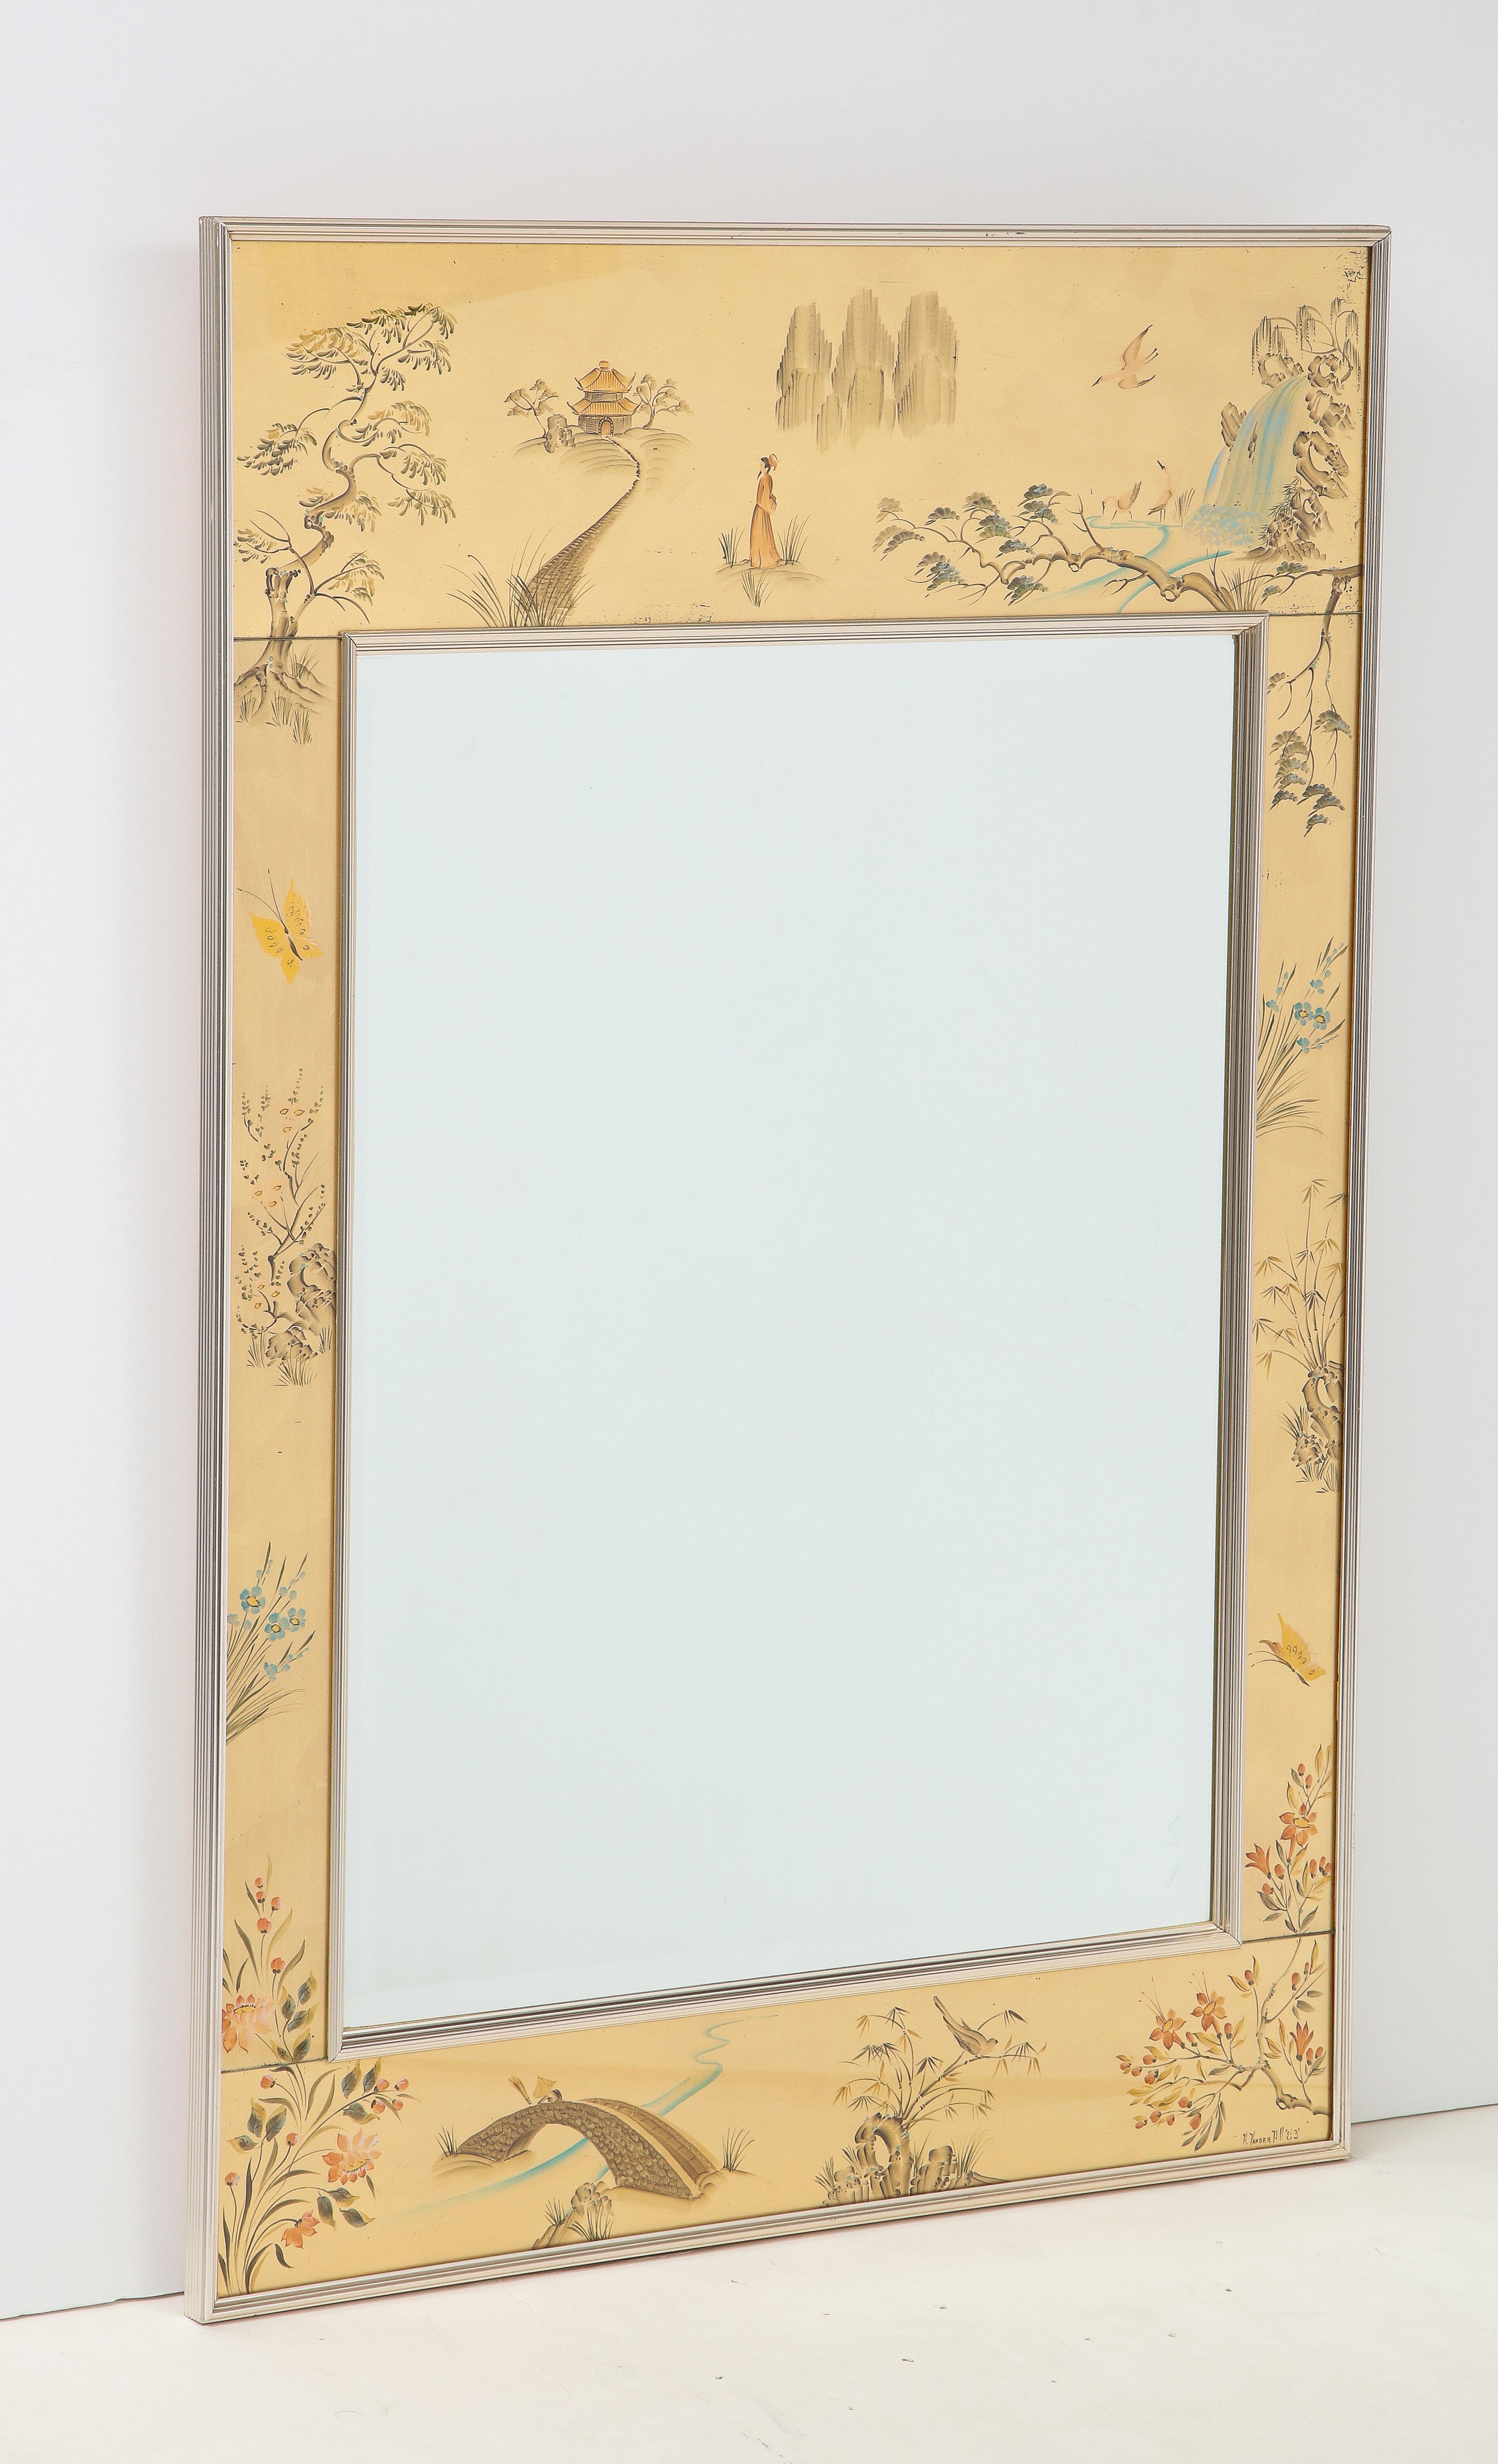 Chinoiserie style mirror with gold leaf eglomise panels depicting various nature scenes of flora and water falls. Panels surround a beveled mirror center, all in a metal surround.